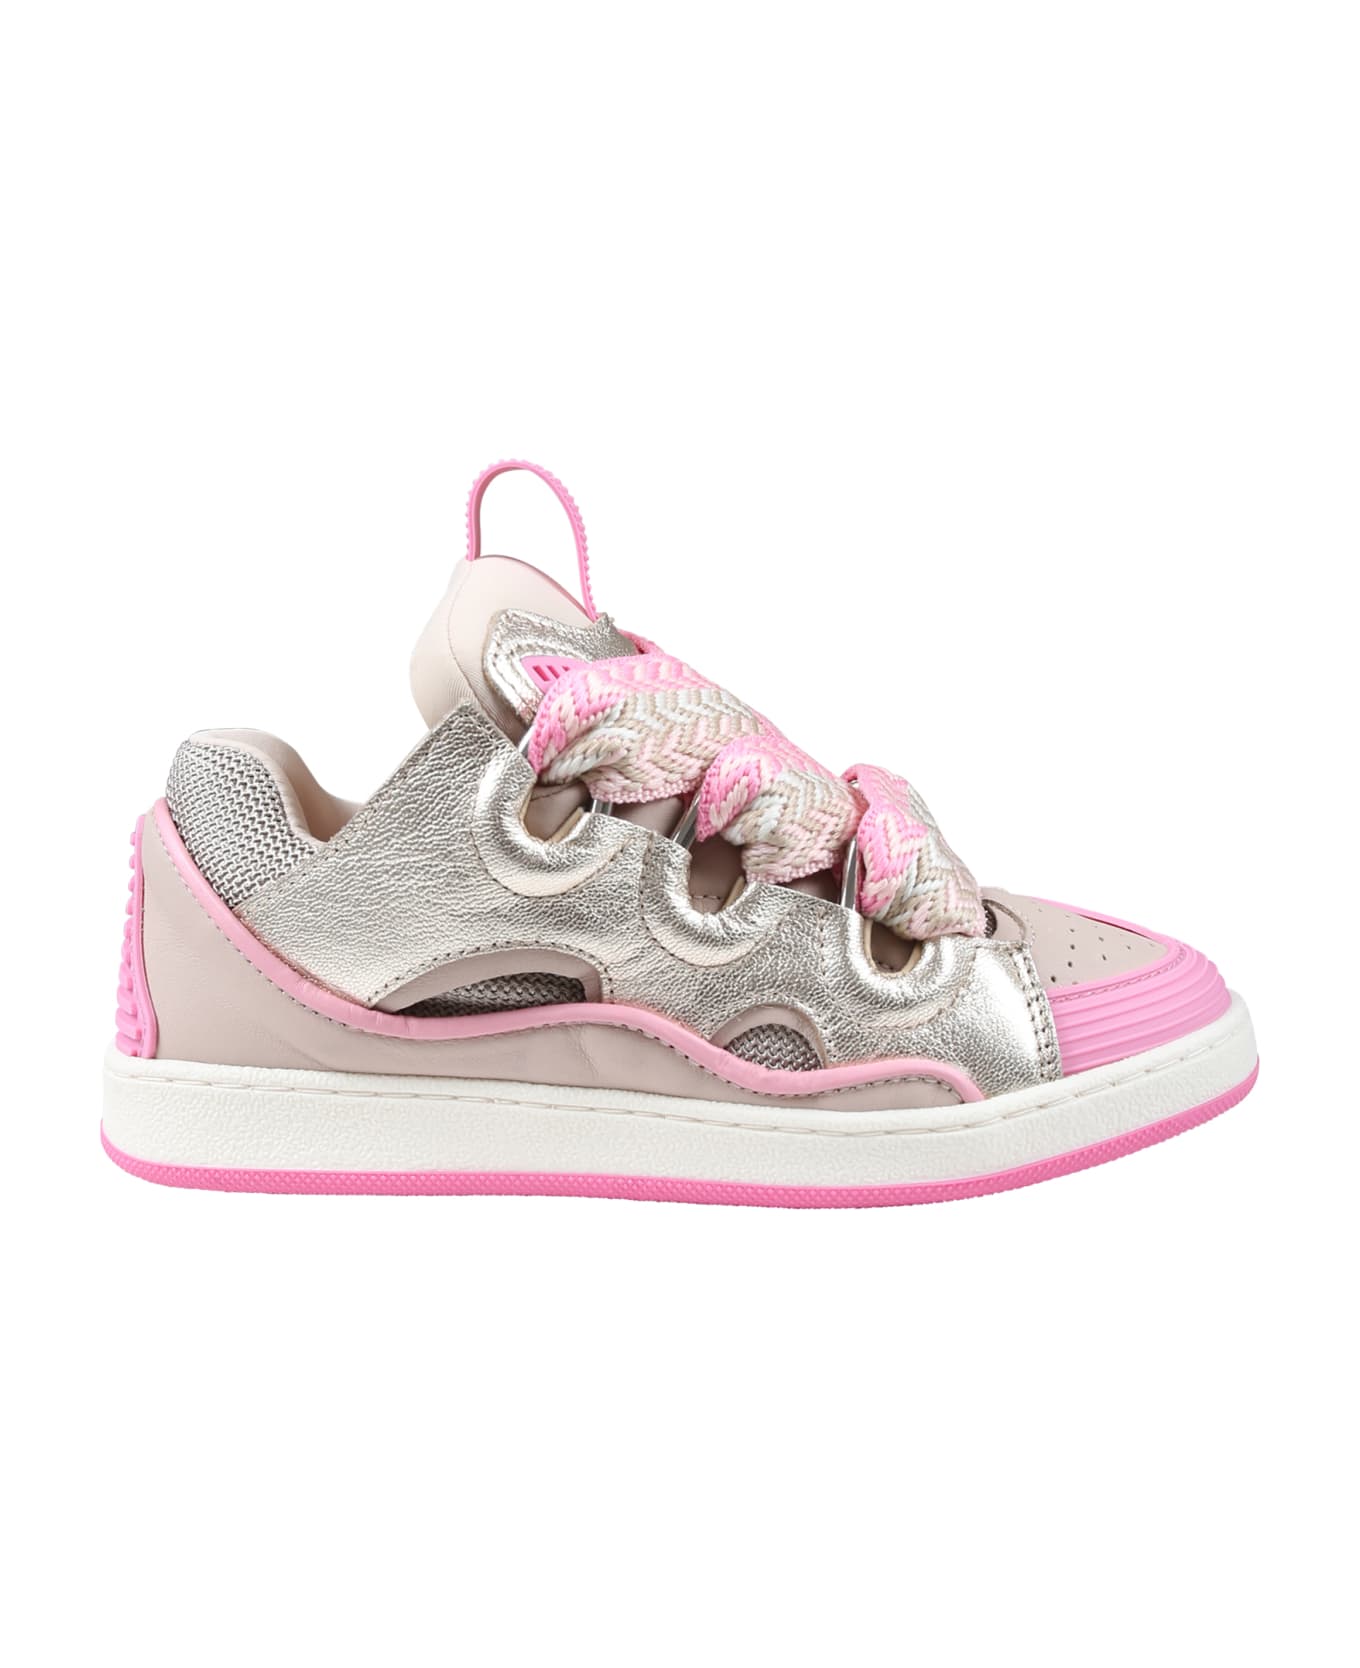 Lanvin Pink Sneakers For Girl - Rosa